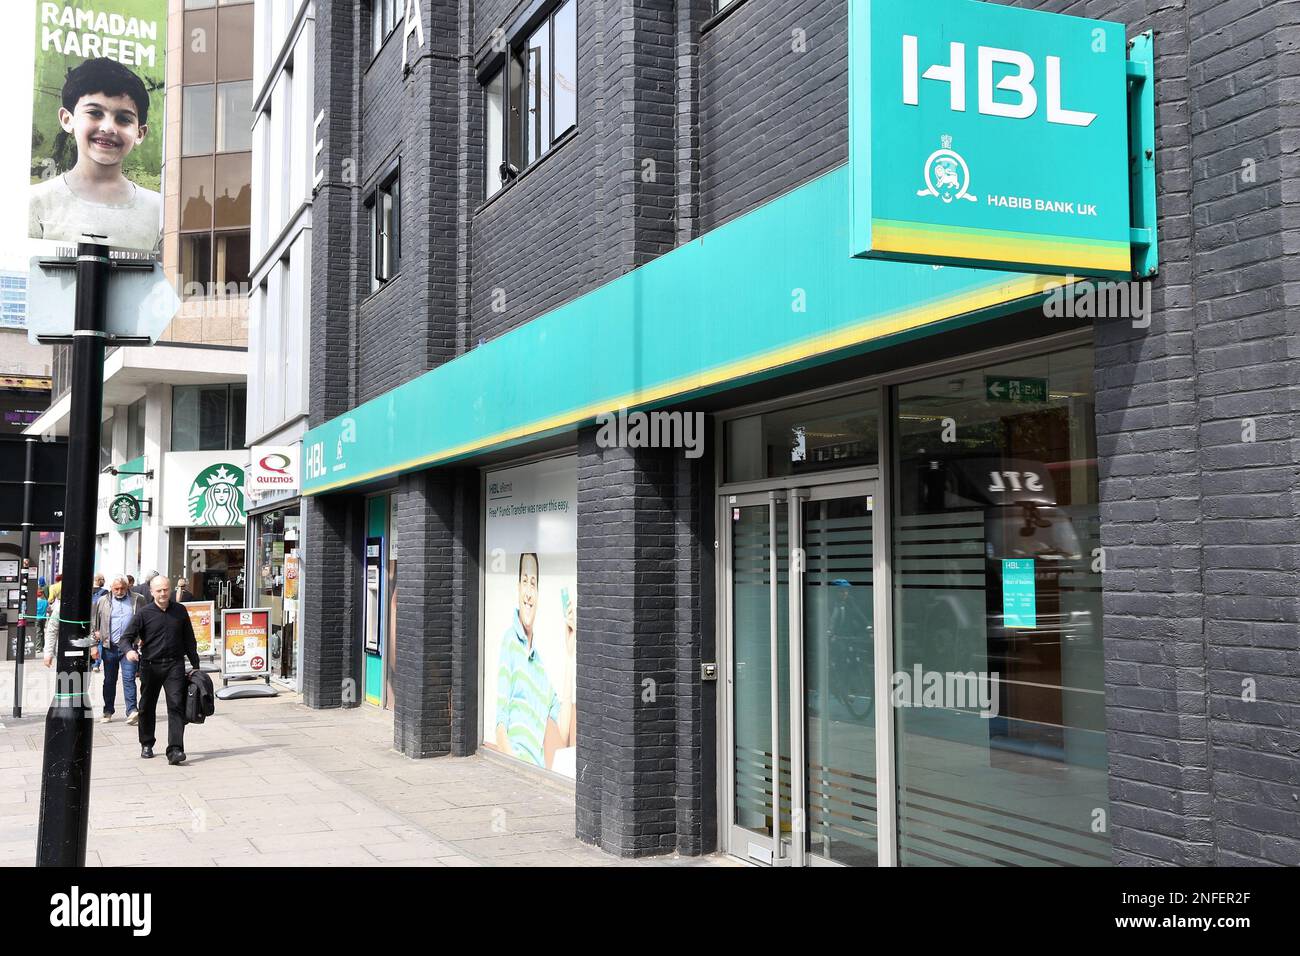 LONDON, UK - JULY 7, 2016: Person walks by Habib Bank UK branch in London. Habib Bank Limited is one of oldest banks from Pakistan. Stock Photo